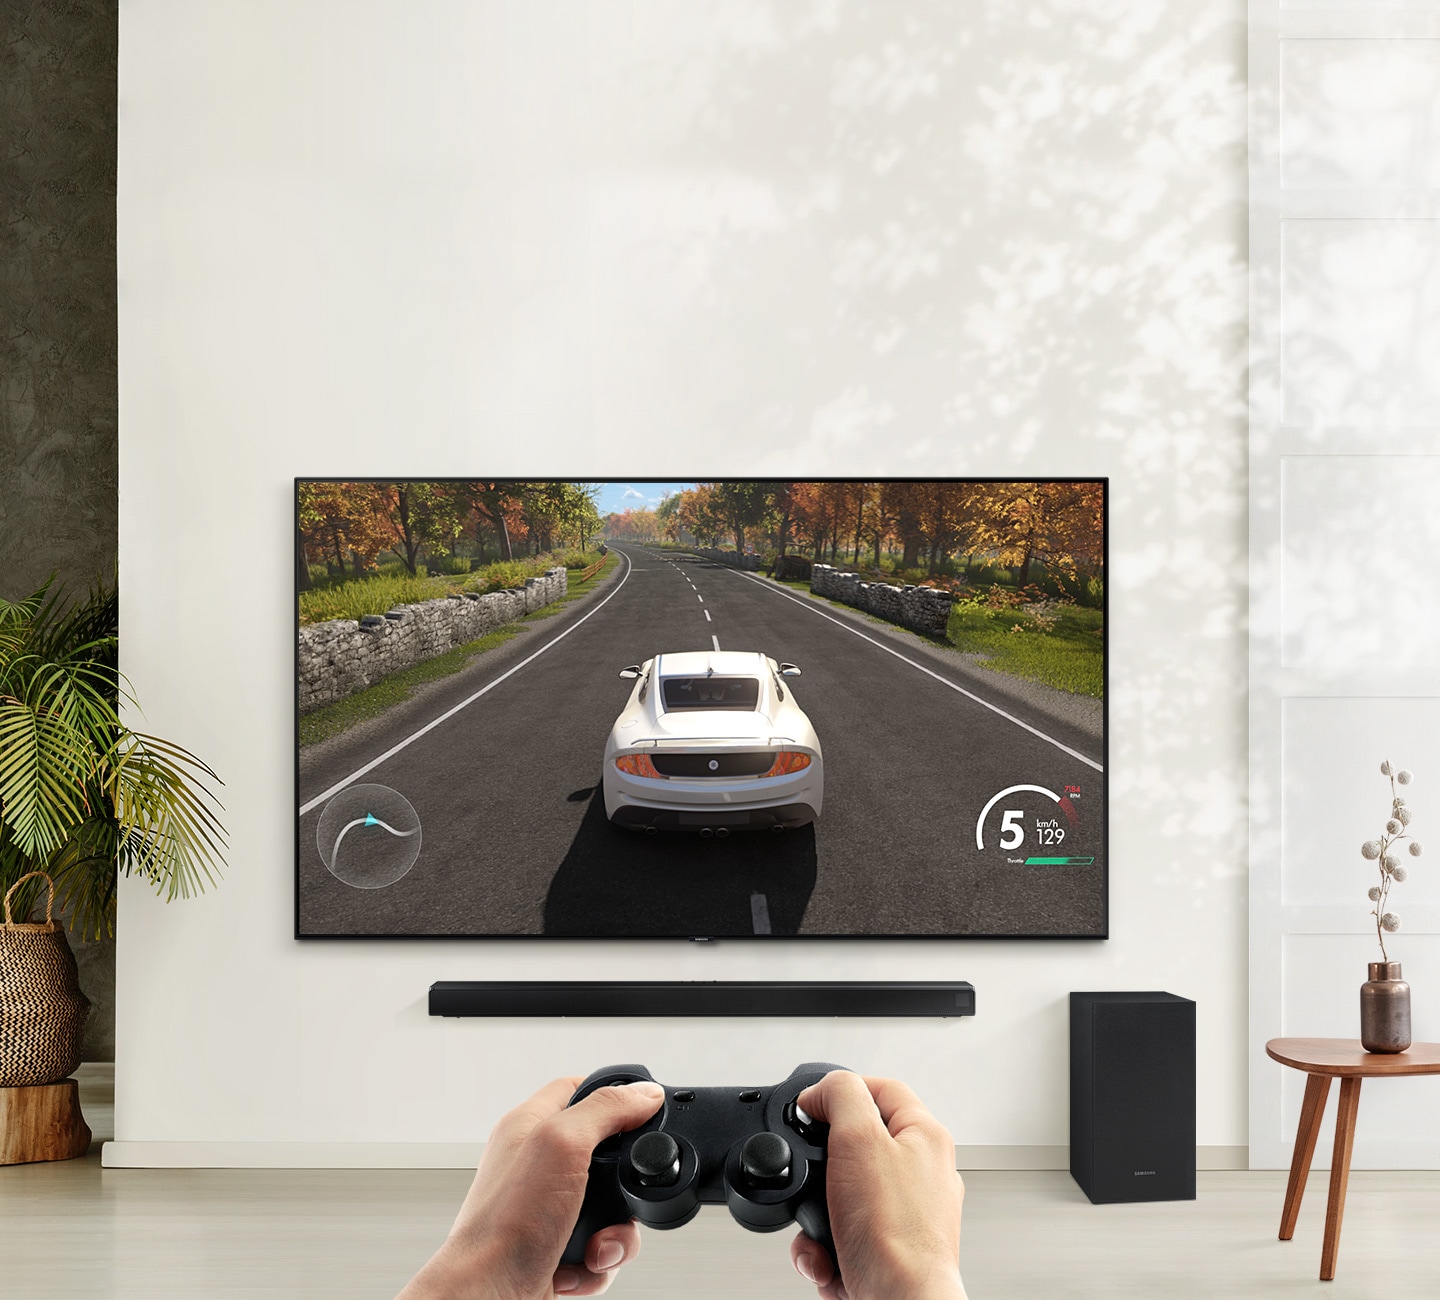 Description: A user is enjoying soundbar’s Game Mode while playing a racing game on their TV connected to soundbar and subwoofer.